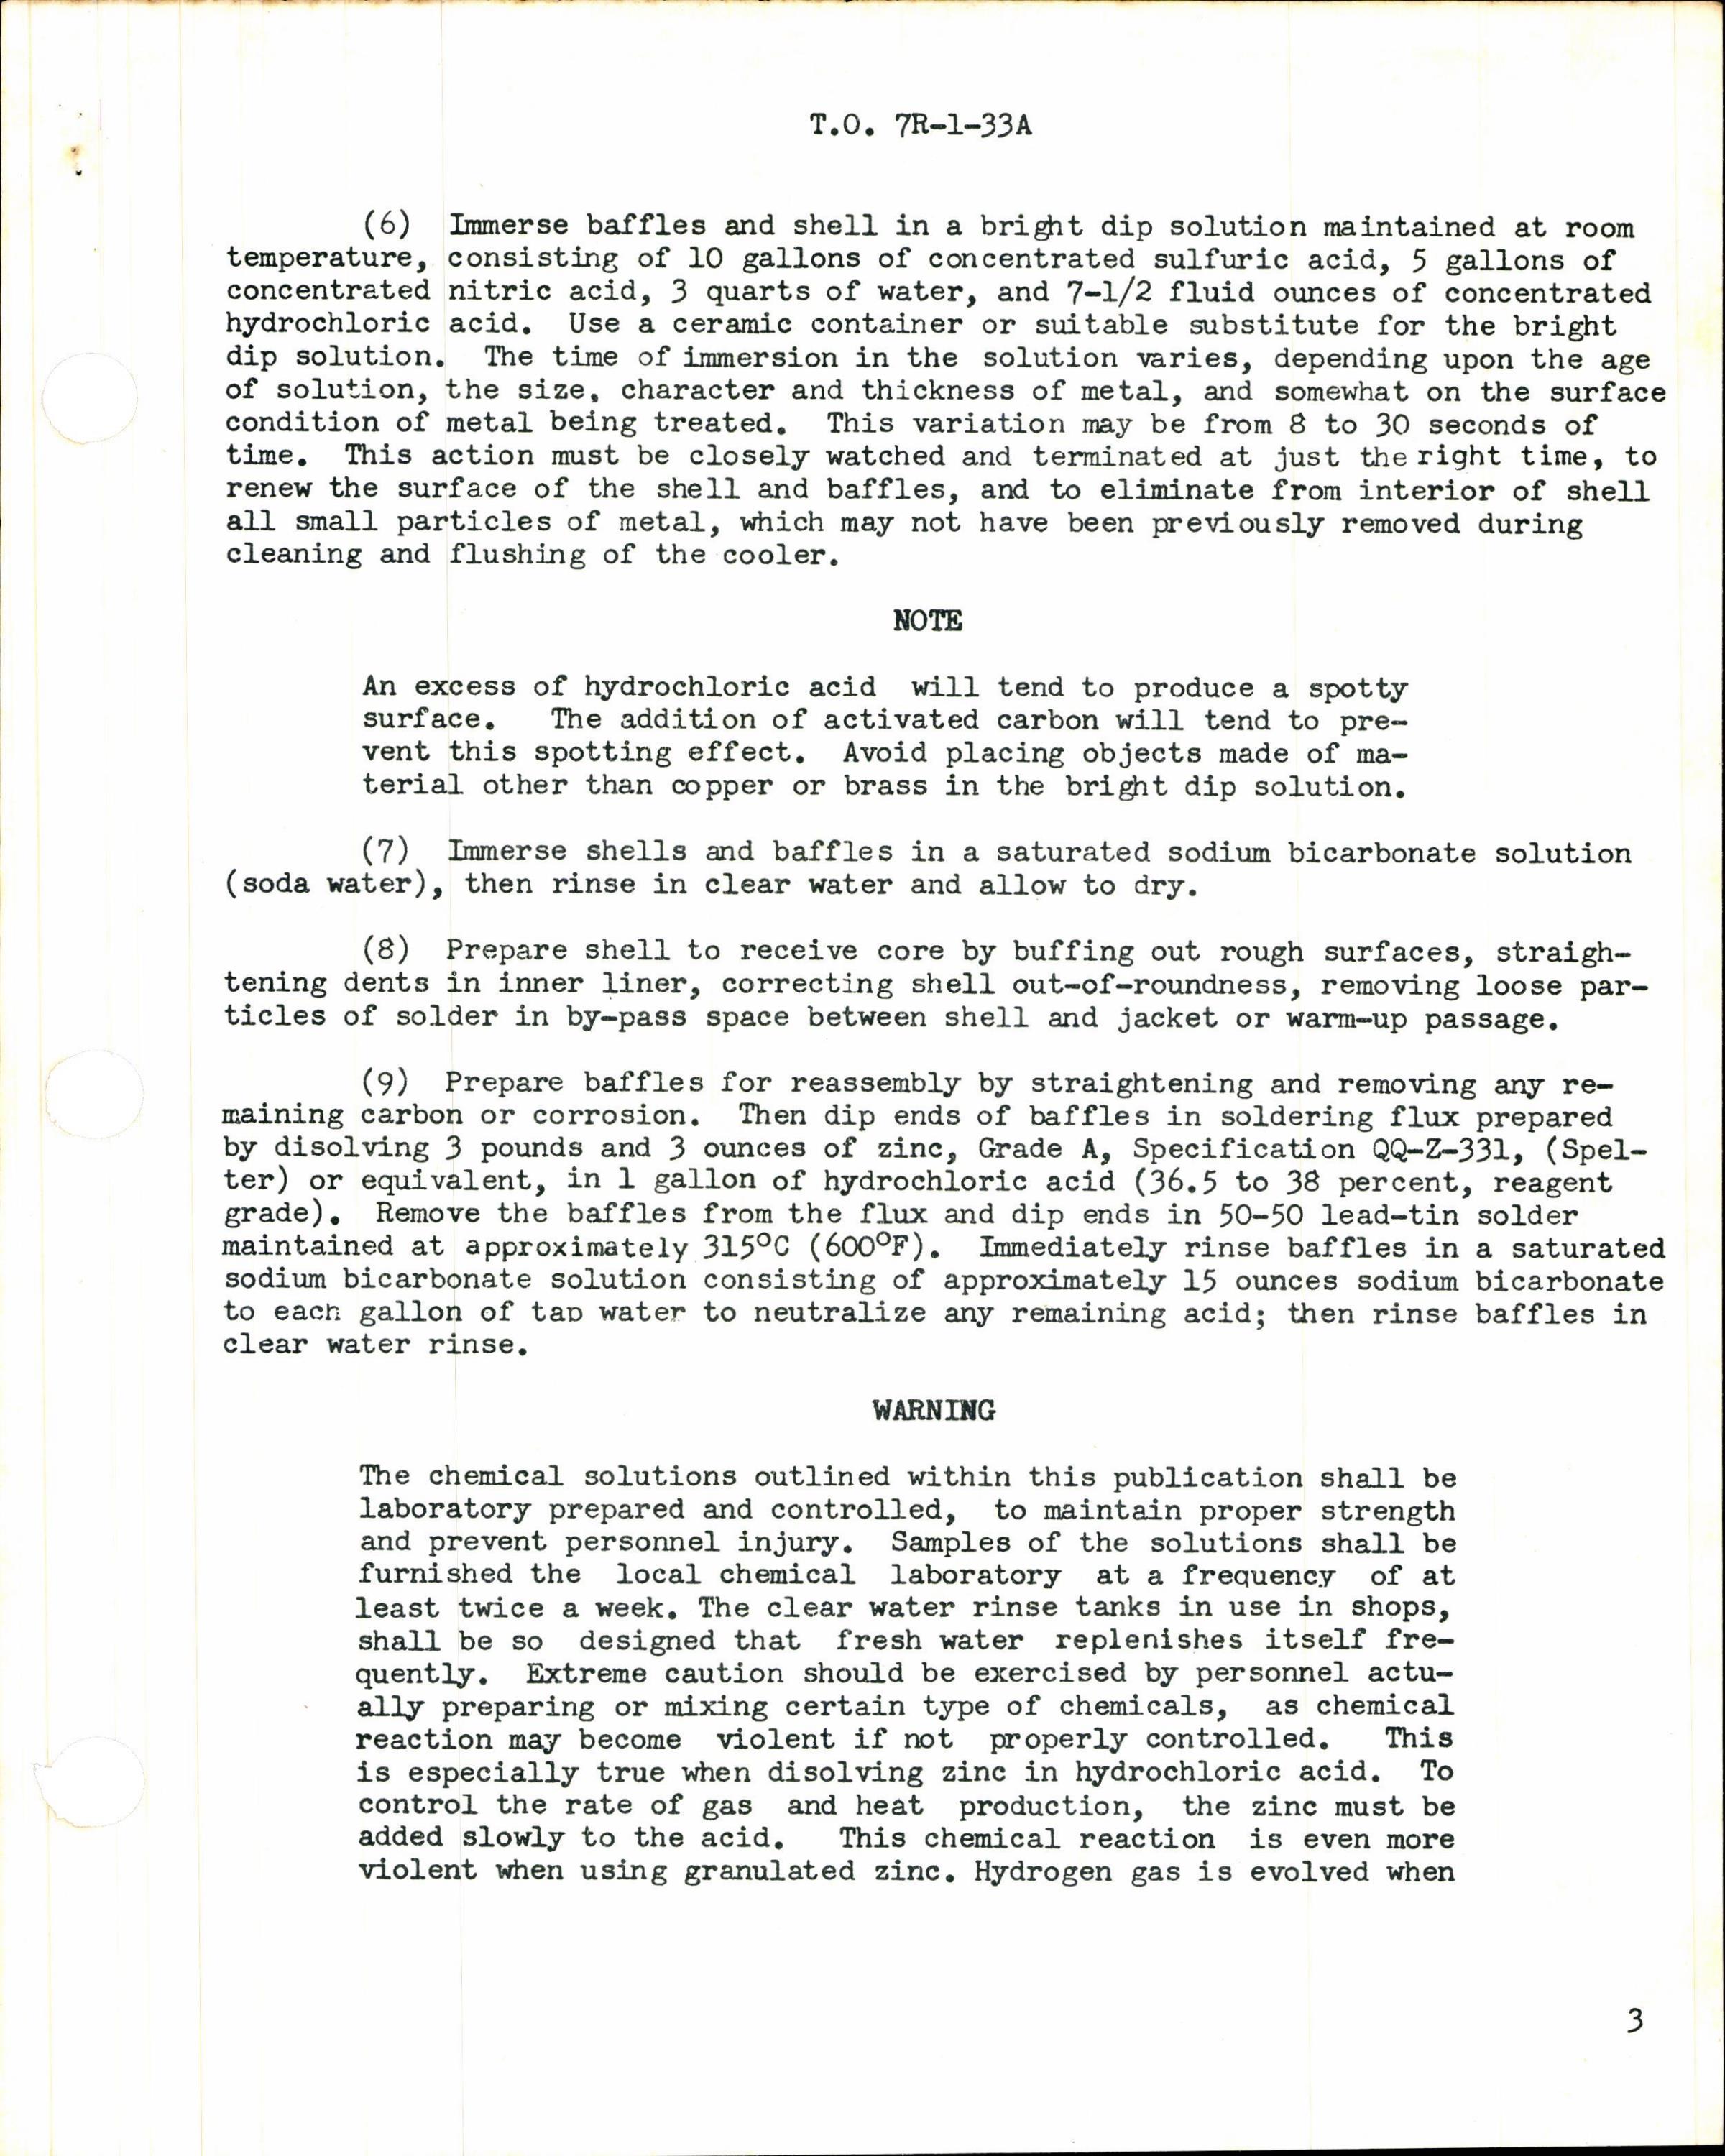 Sample page 3 from AirCorps Library document: Handbook Supplement Overhaul Instructions for Oil Coolers and Control Valves